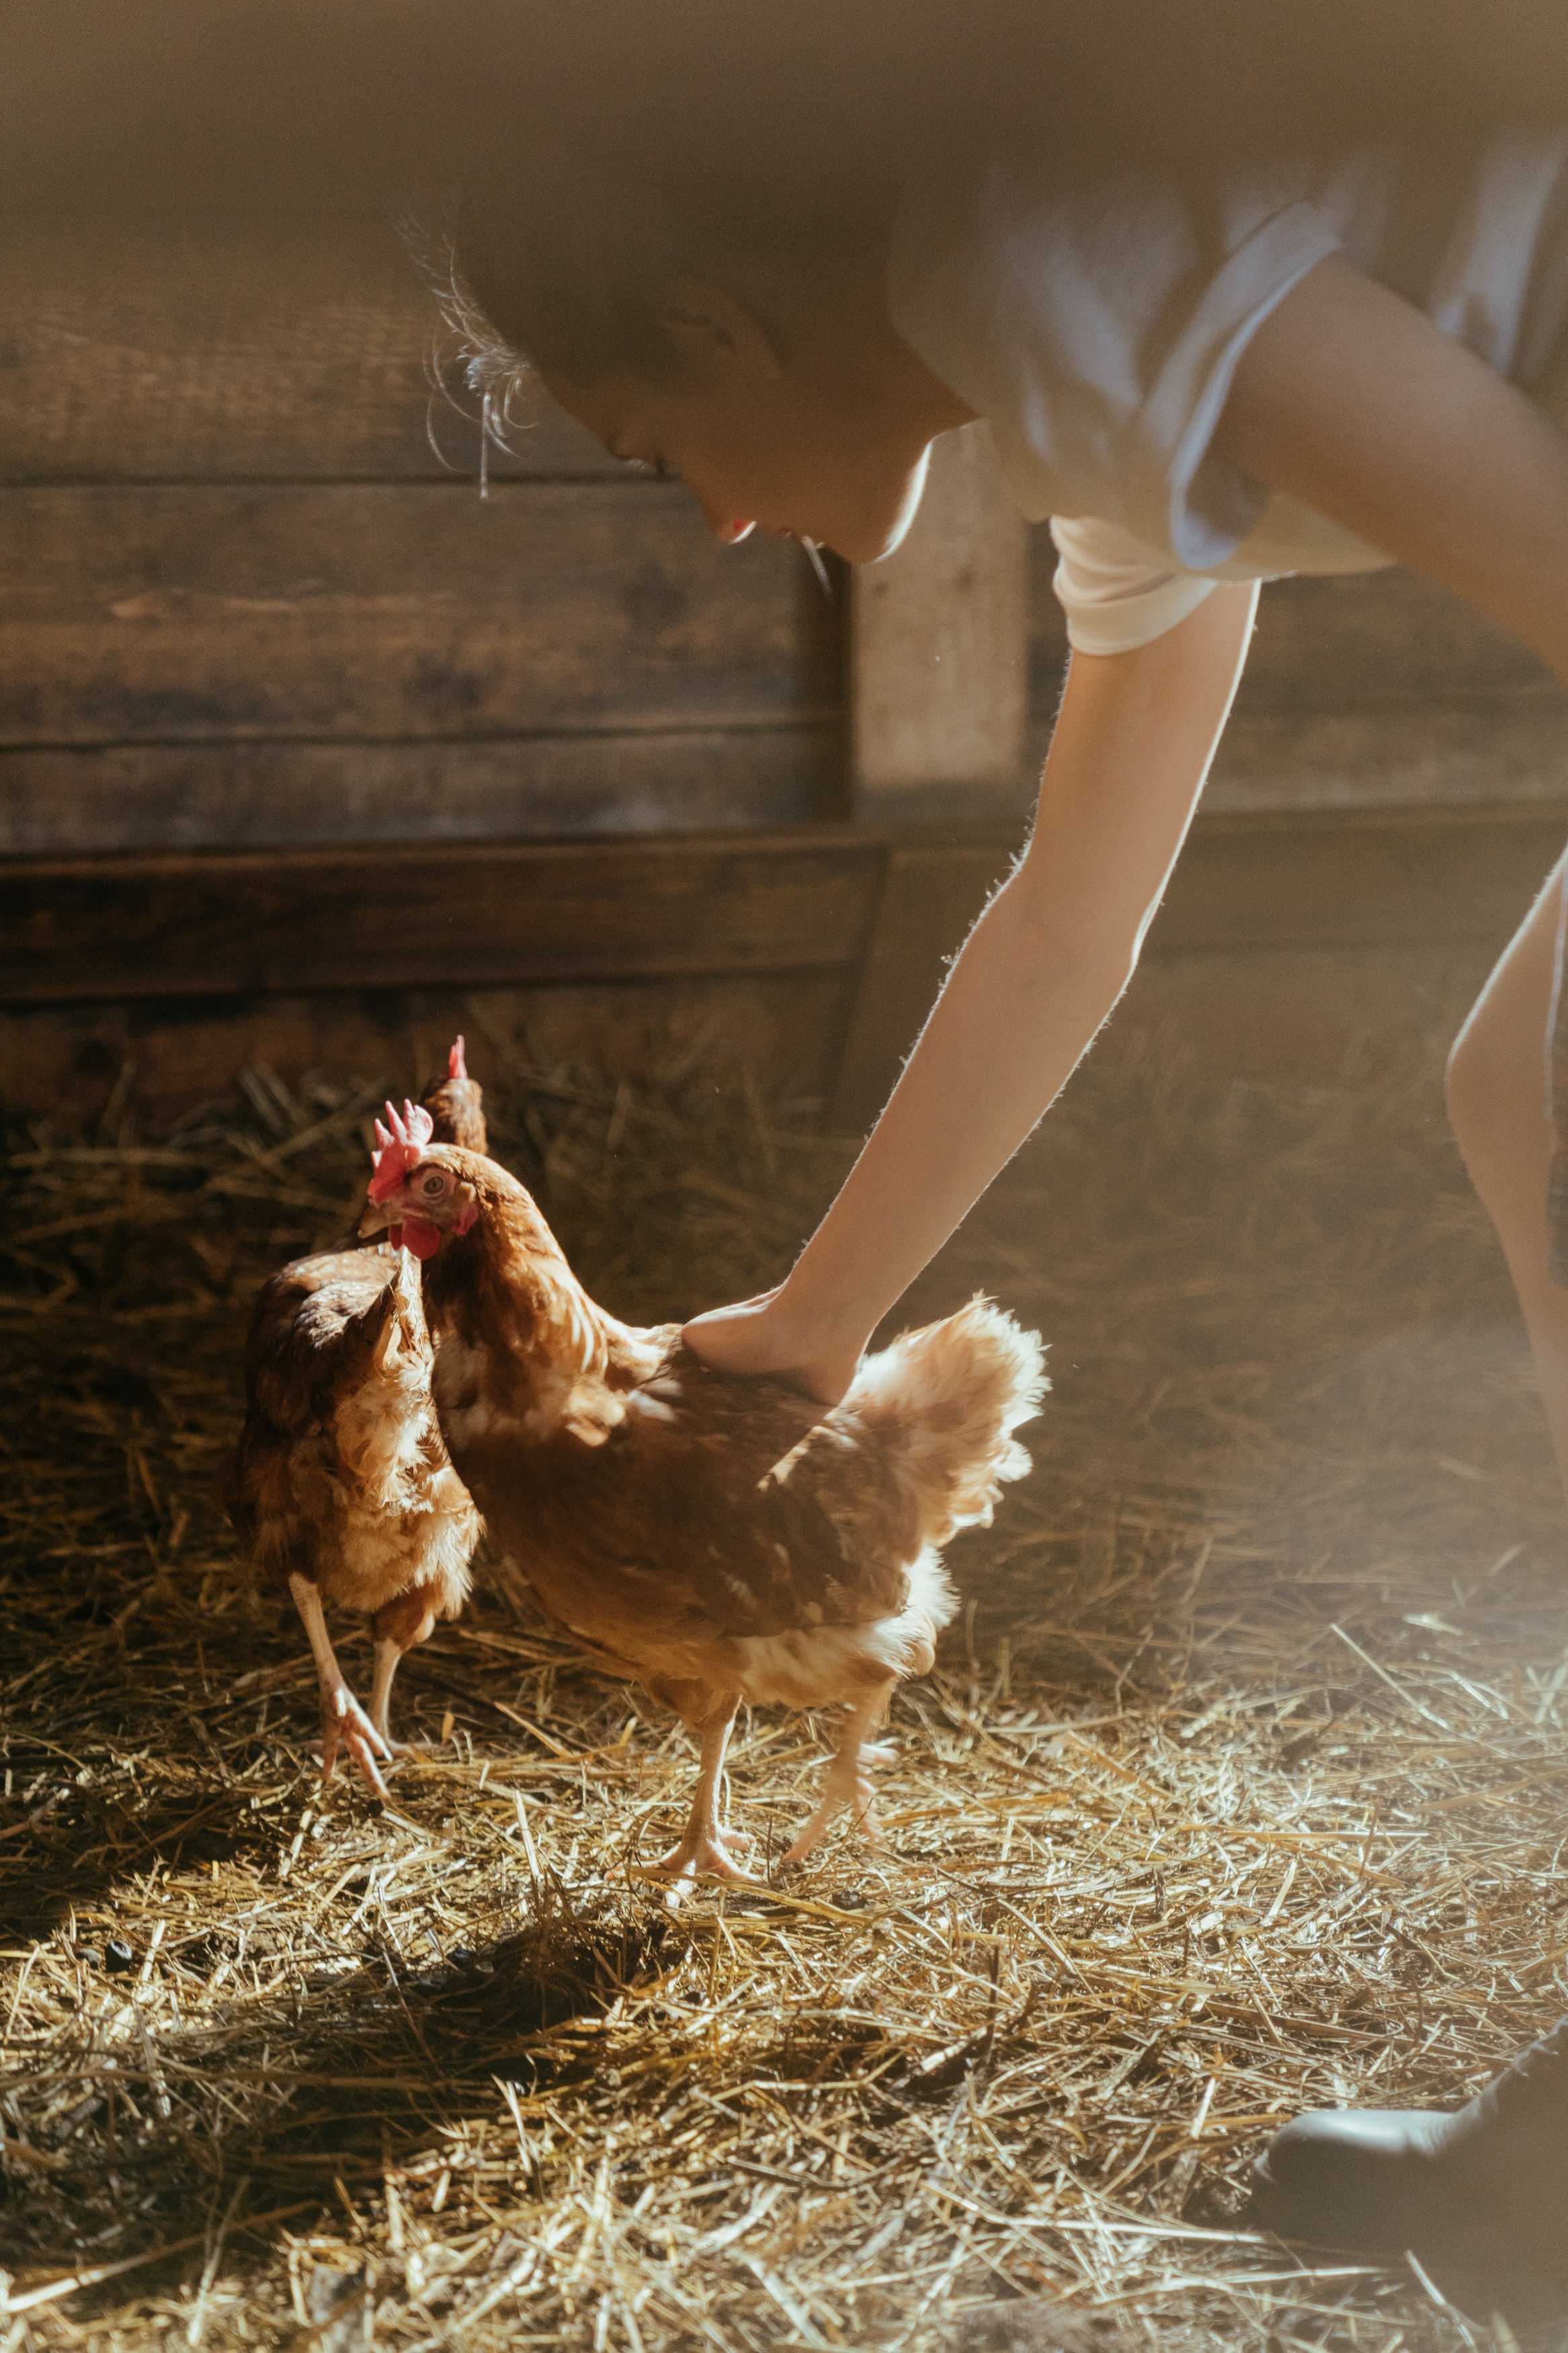 Shift_Organic, Free-Range, Caged, Barn Laid, Bred Free-Range… What Does It All Mean?